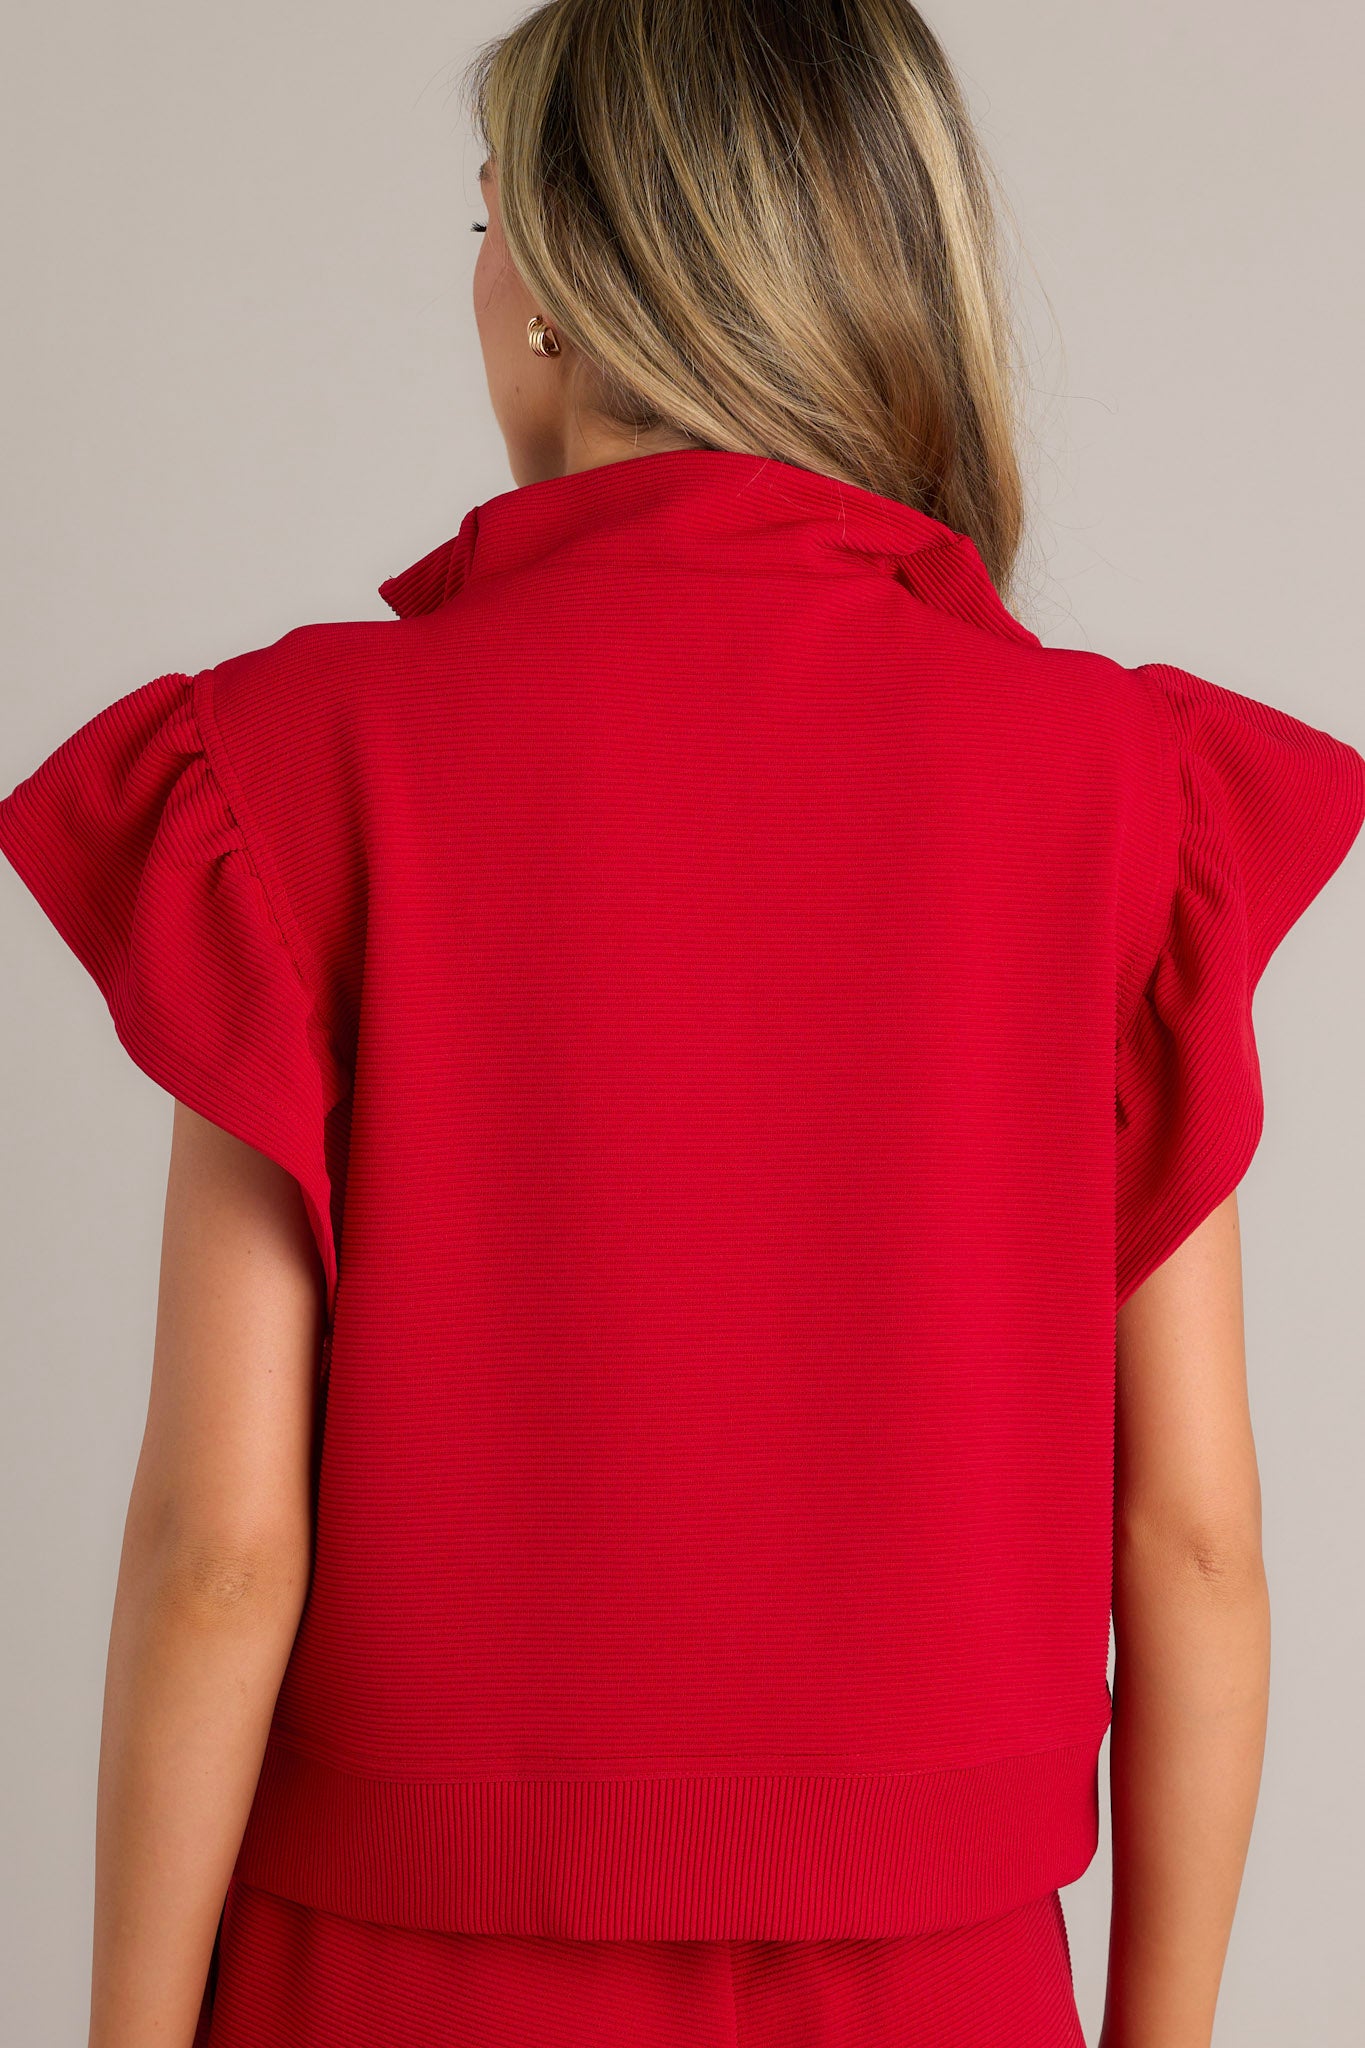 Back view of a red top highlighting the ribbed fabric, wide ruffled sleeves, and thick hemline.